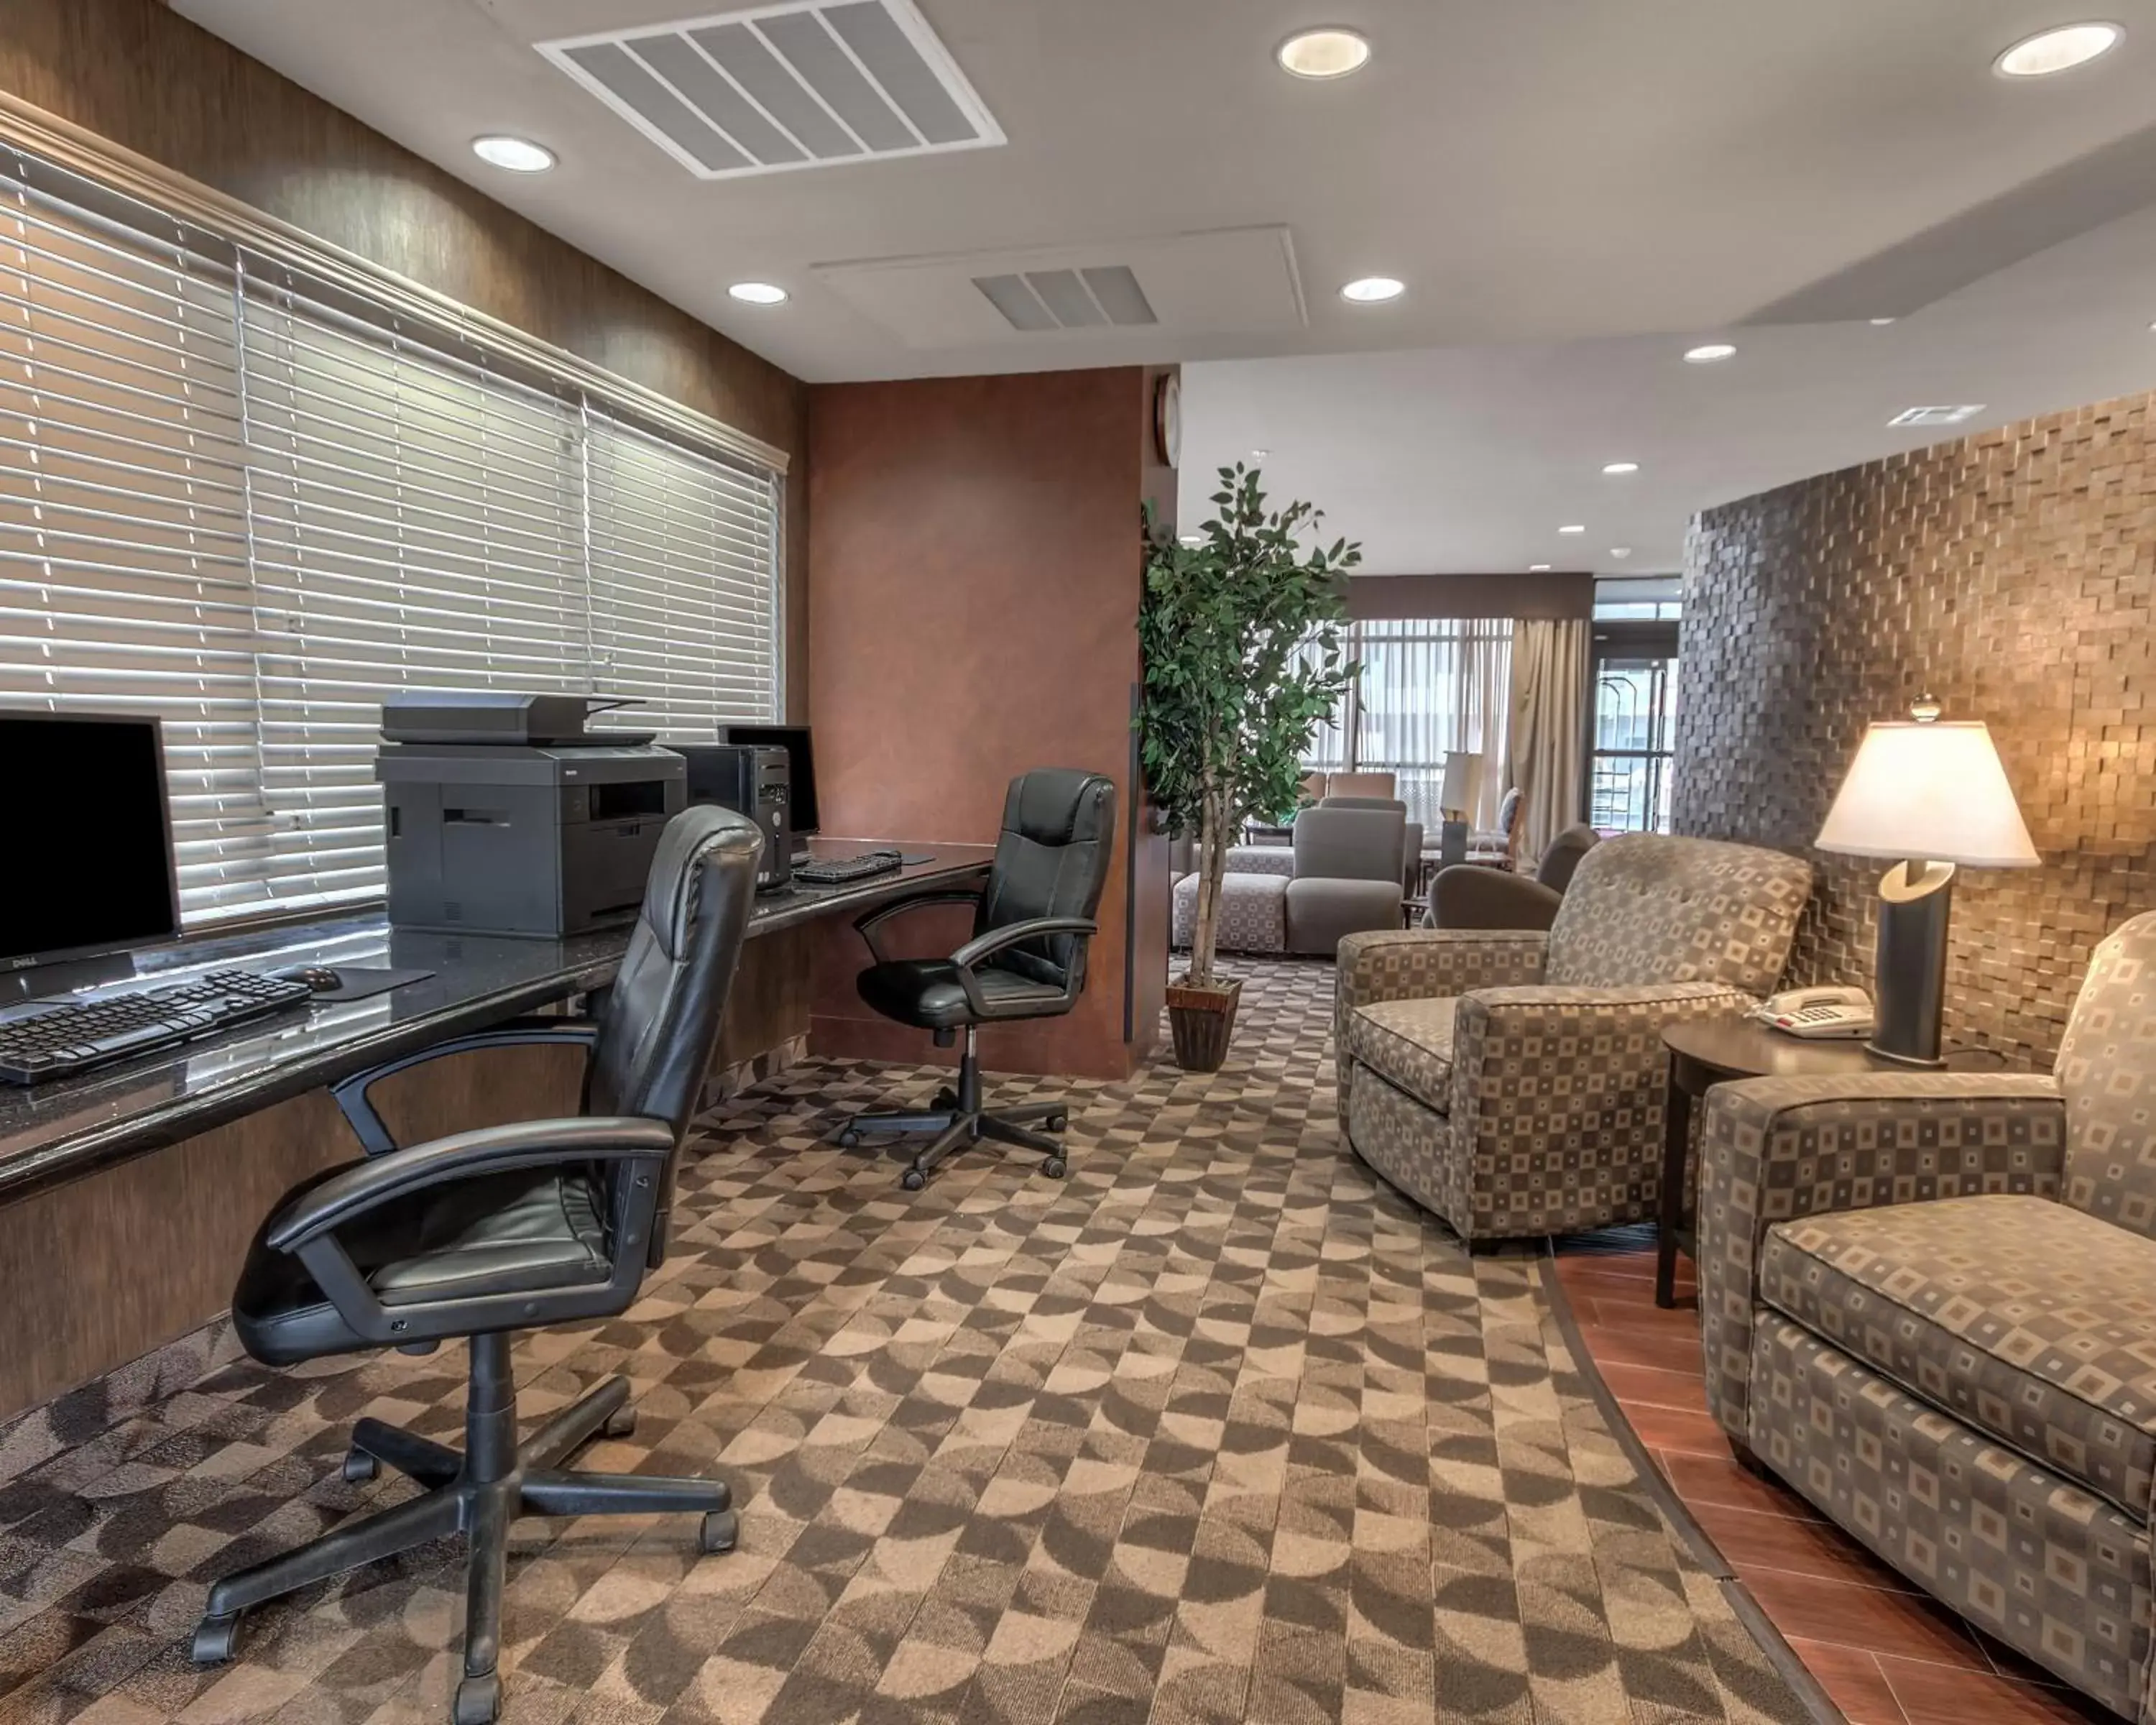 Business facilities in MainStay Suites Hobbs